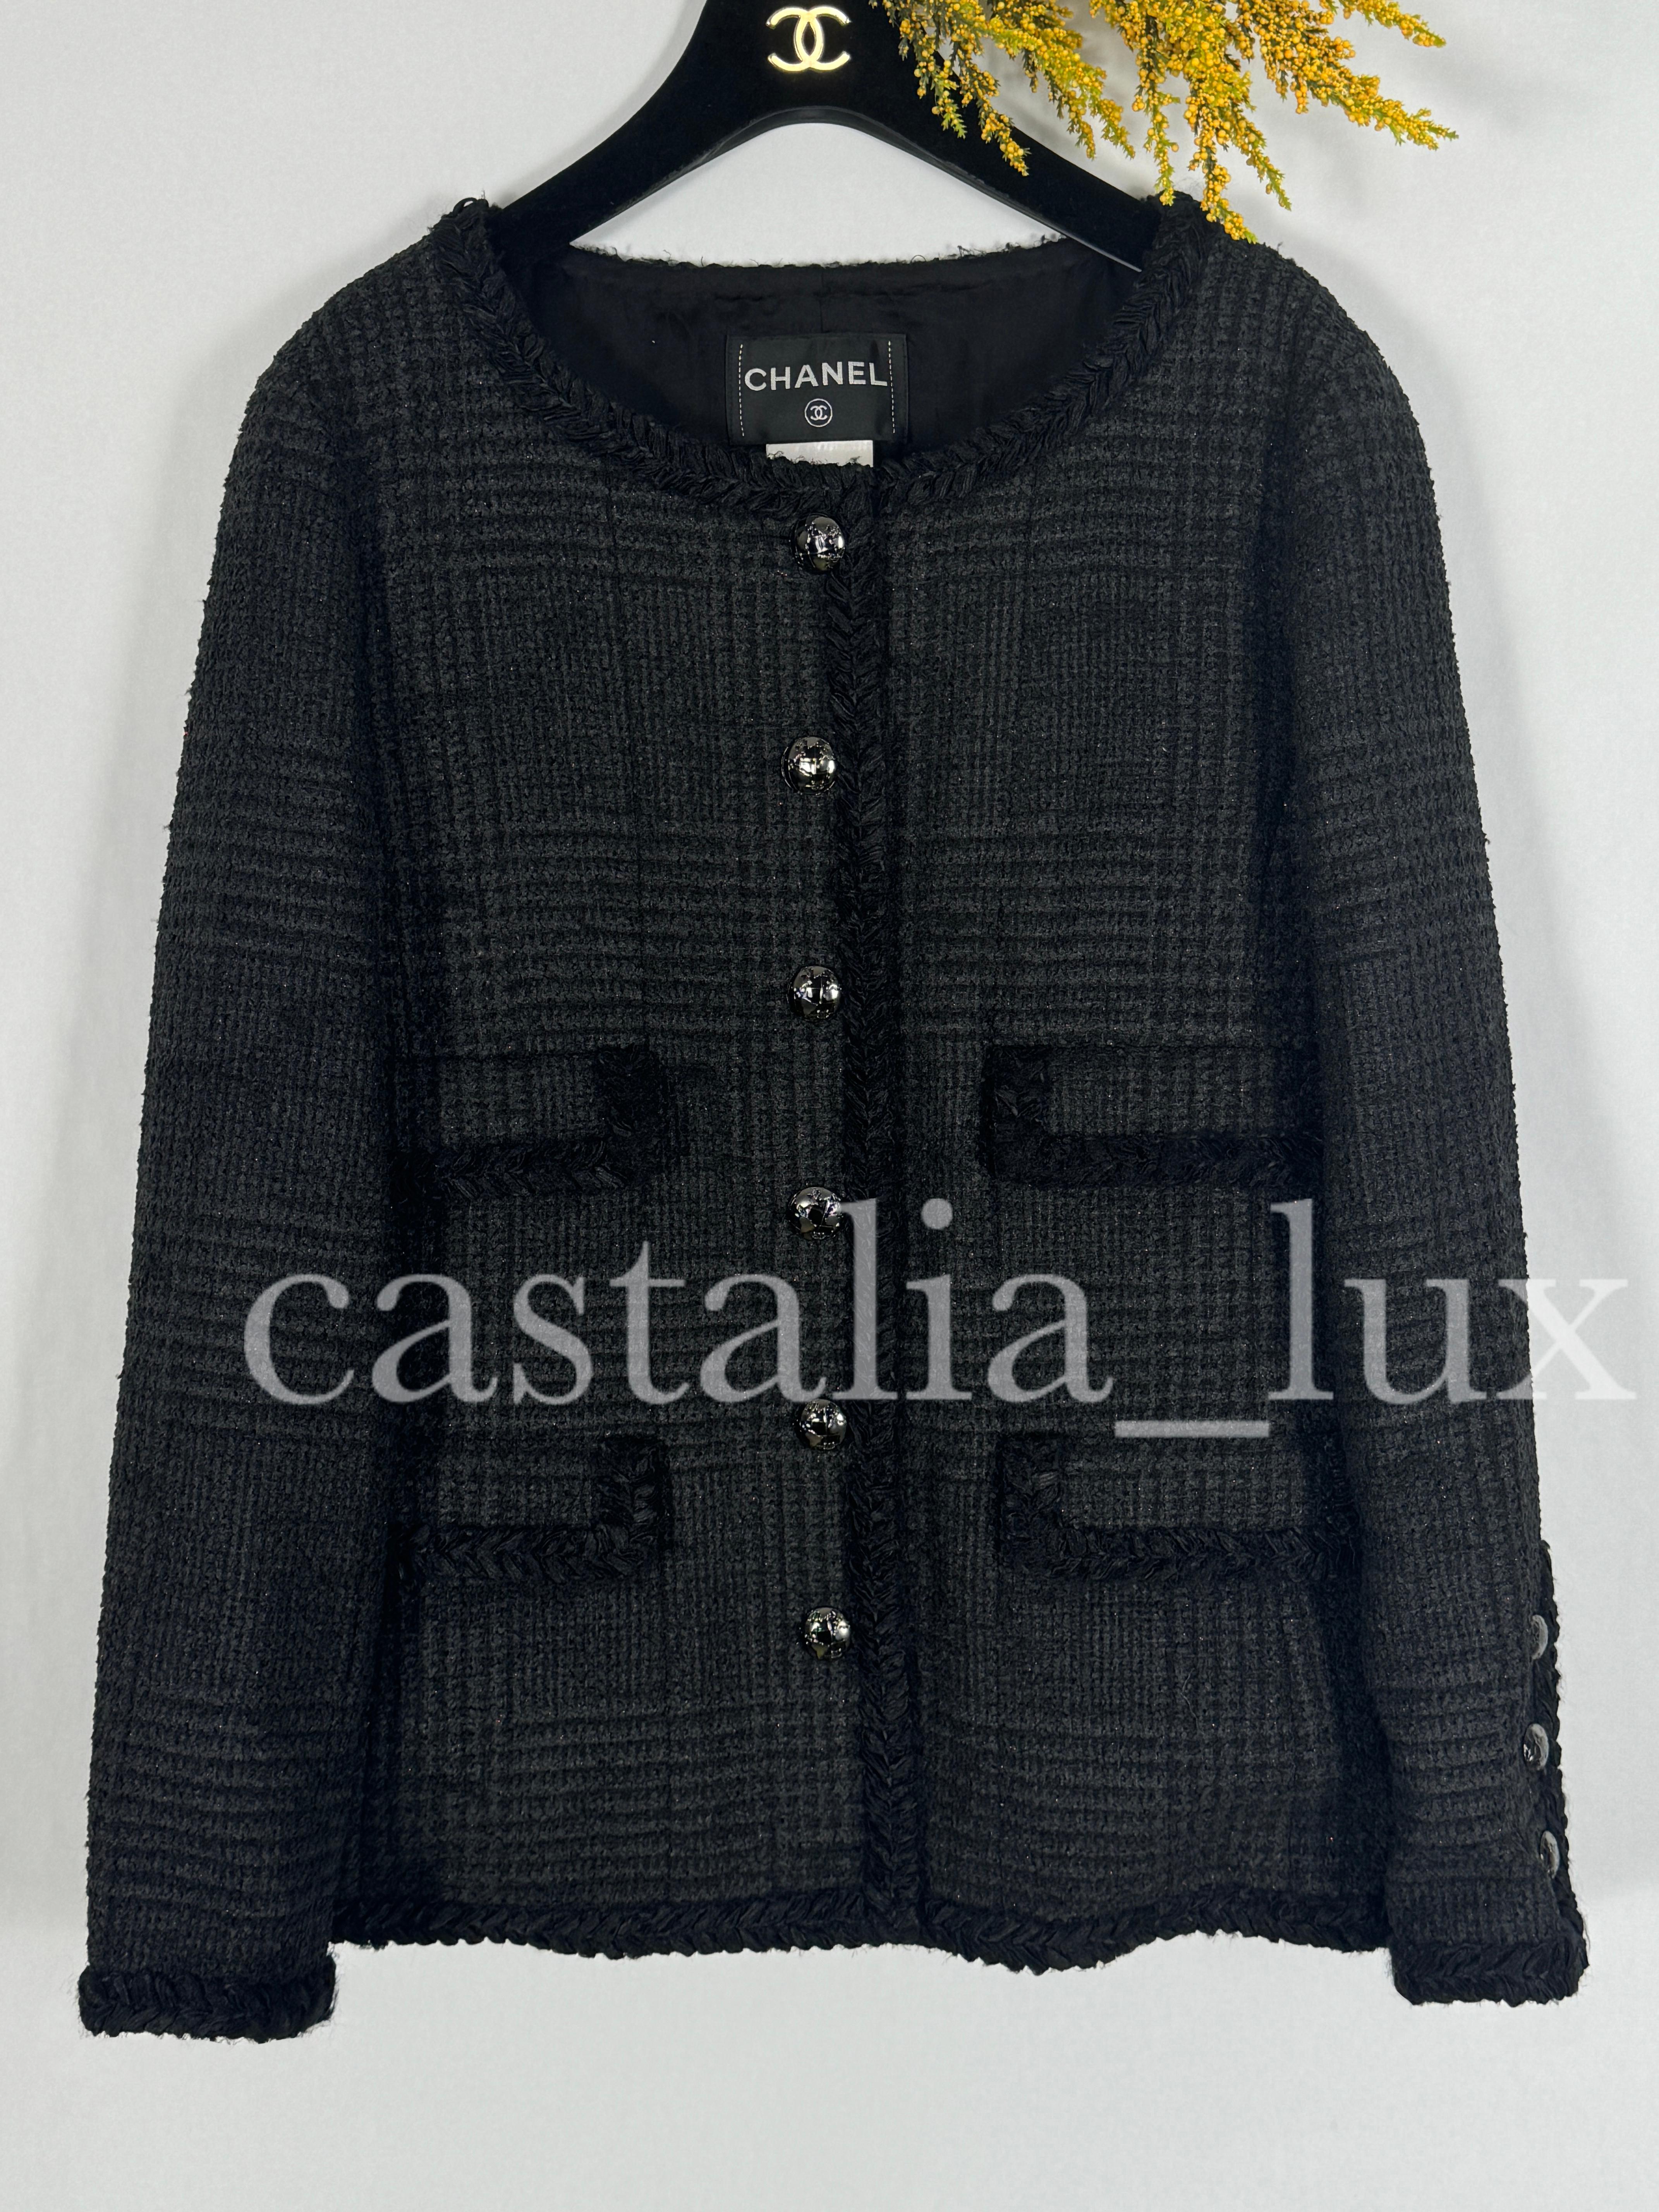 Chanel Most Iconic Globalization Collection Black Tweed Jacket For Sale 8